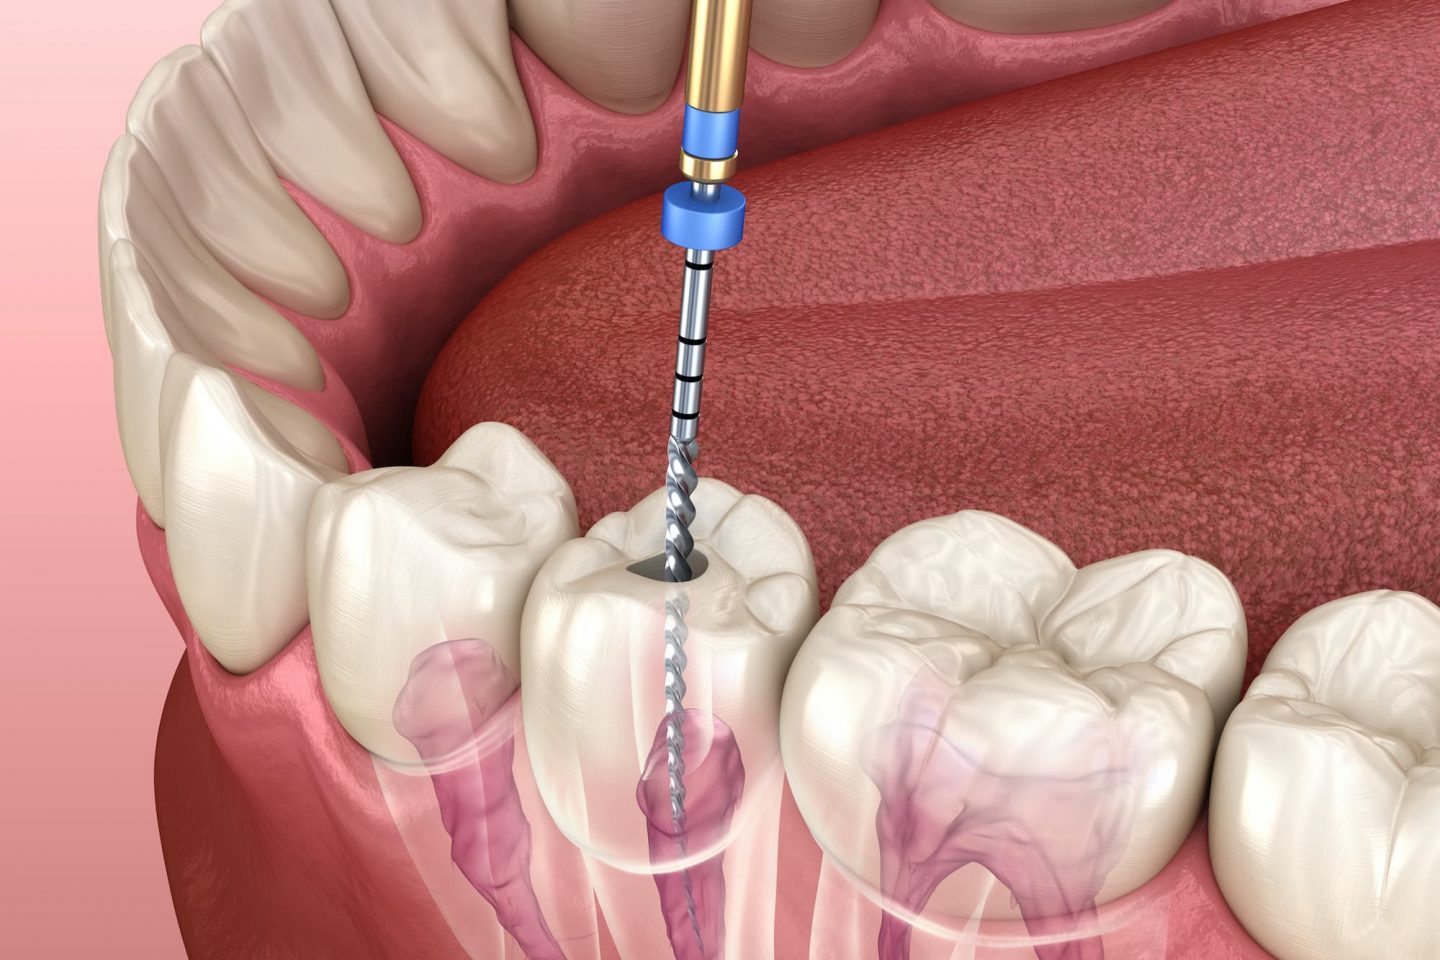 Root Canal is the treatment of choice to save teeth when decay or fracture has reached the nerve.